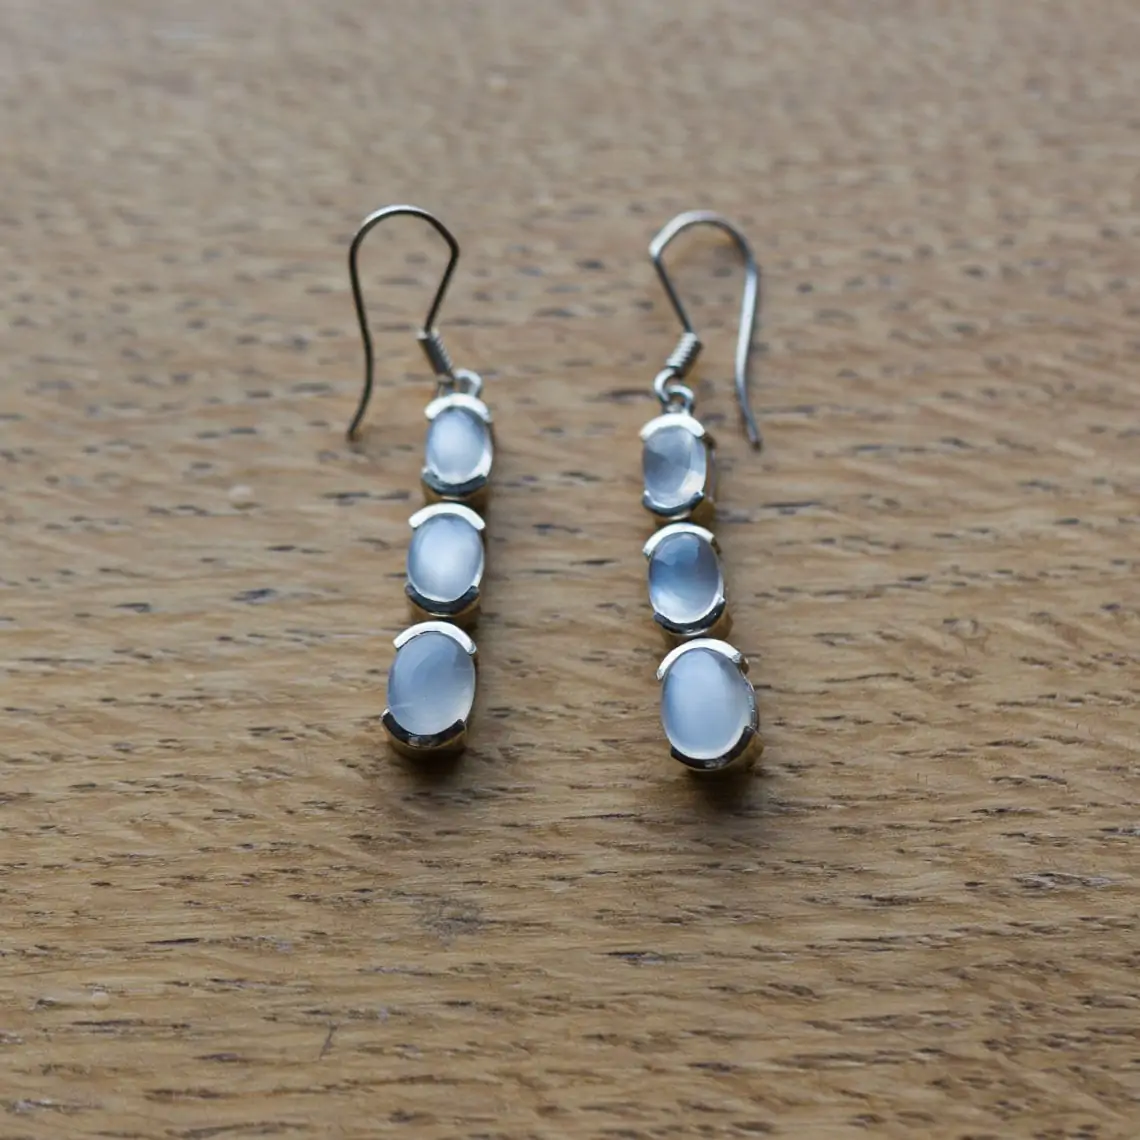 Long three stone silver earrings on wooden background